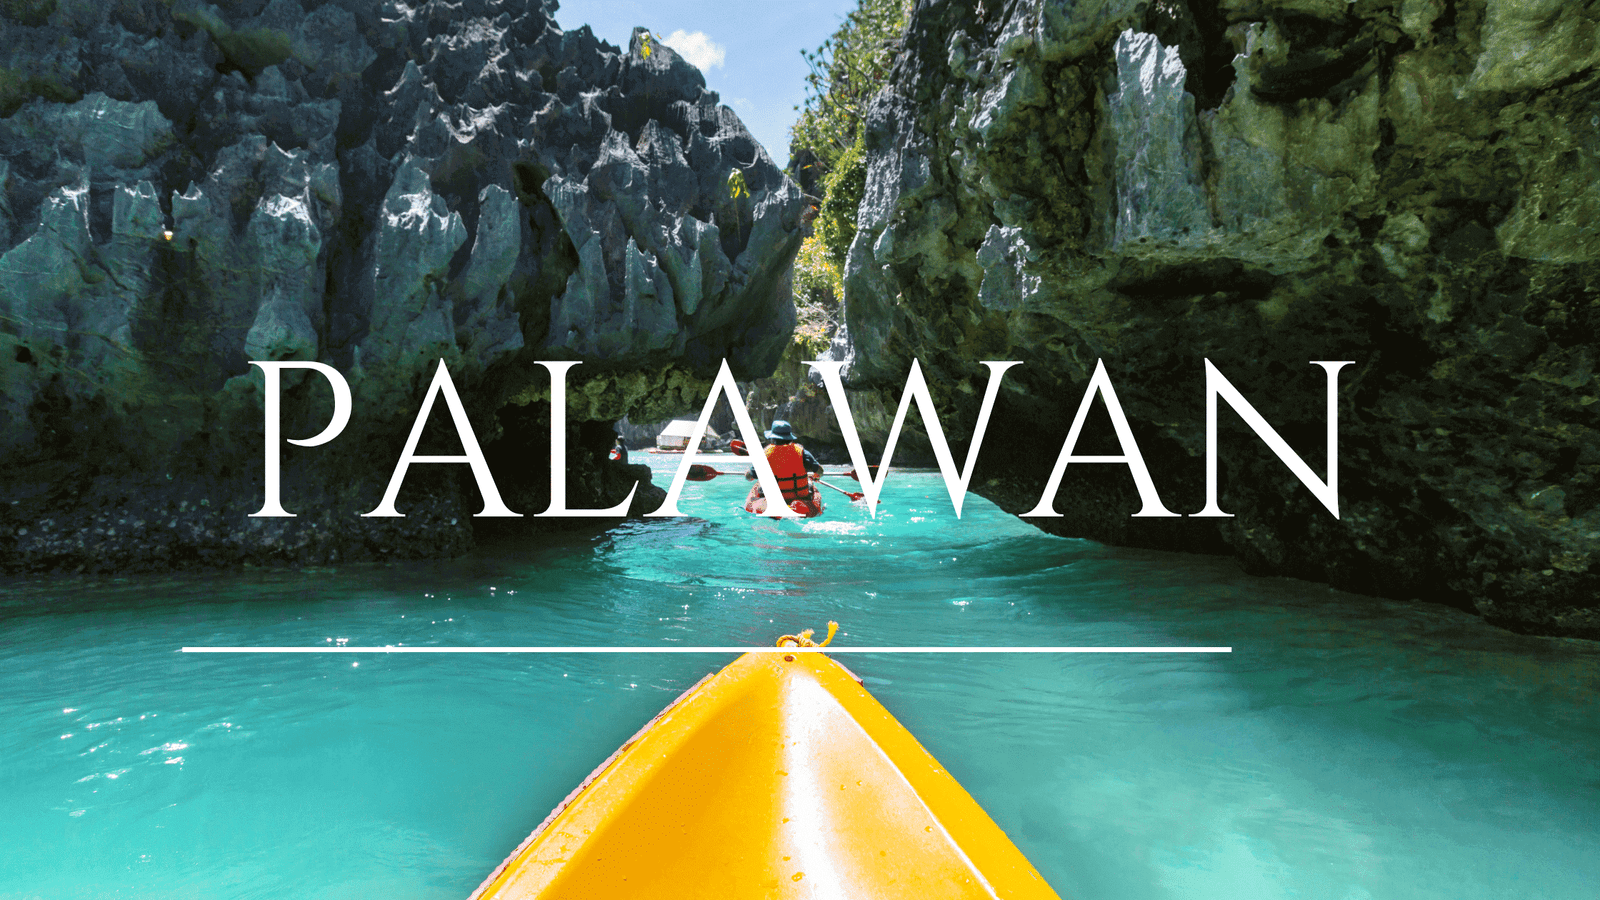 Picturesque scene of the turquoise waters and towering limestone cliffs in El Nido, Palawan, highlighting the untouched natural wonders of the world's best island.